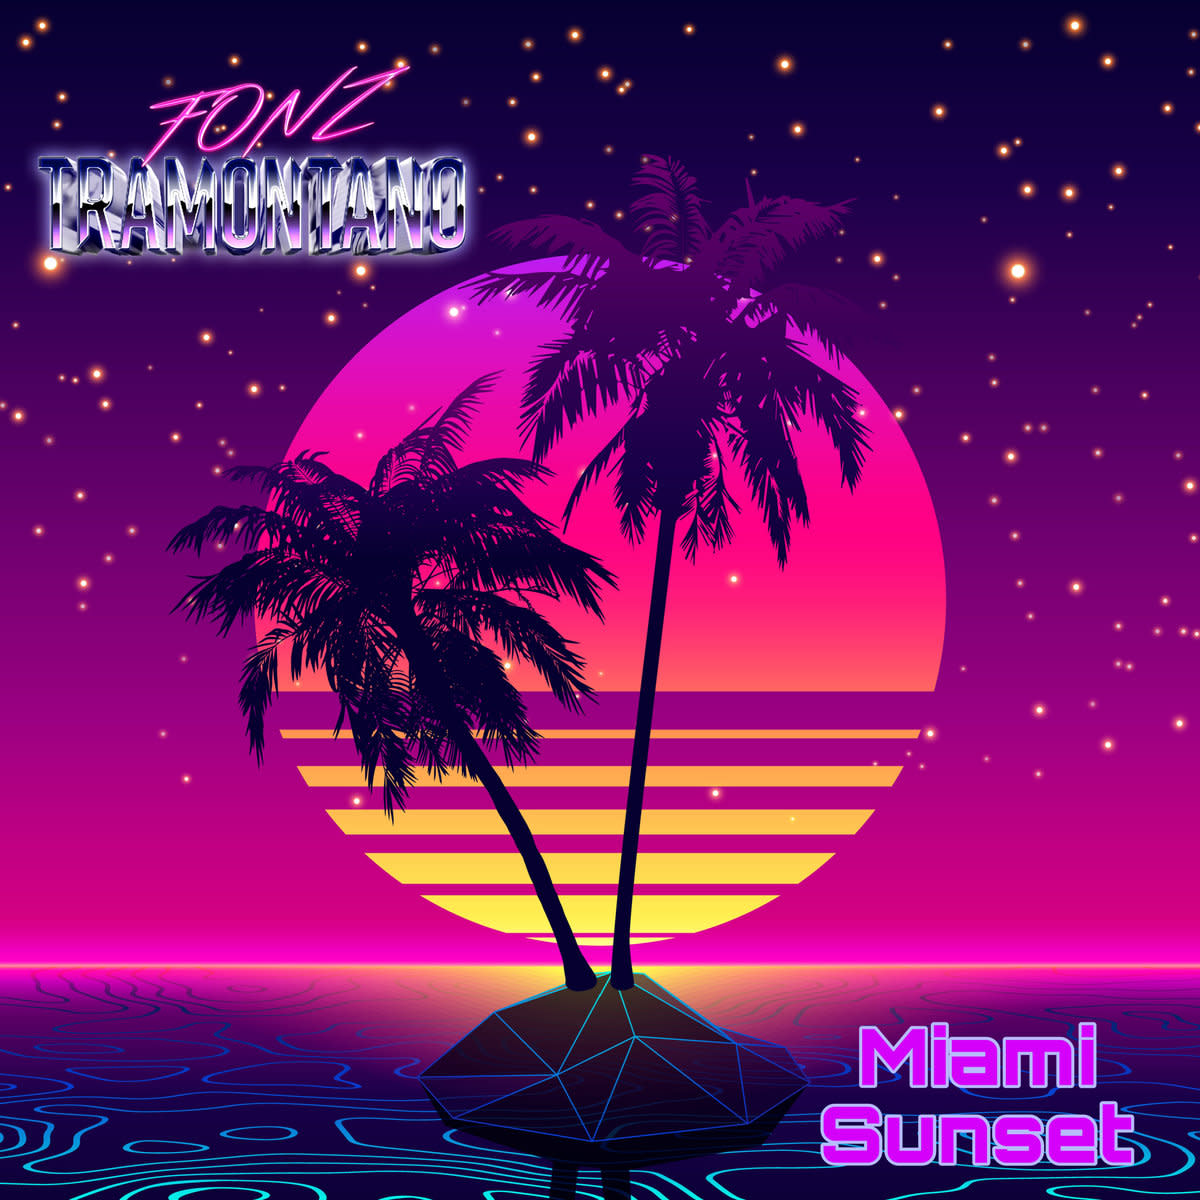 synth-single-review-miami-sunset-by-fonz-tramontano